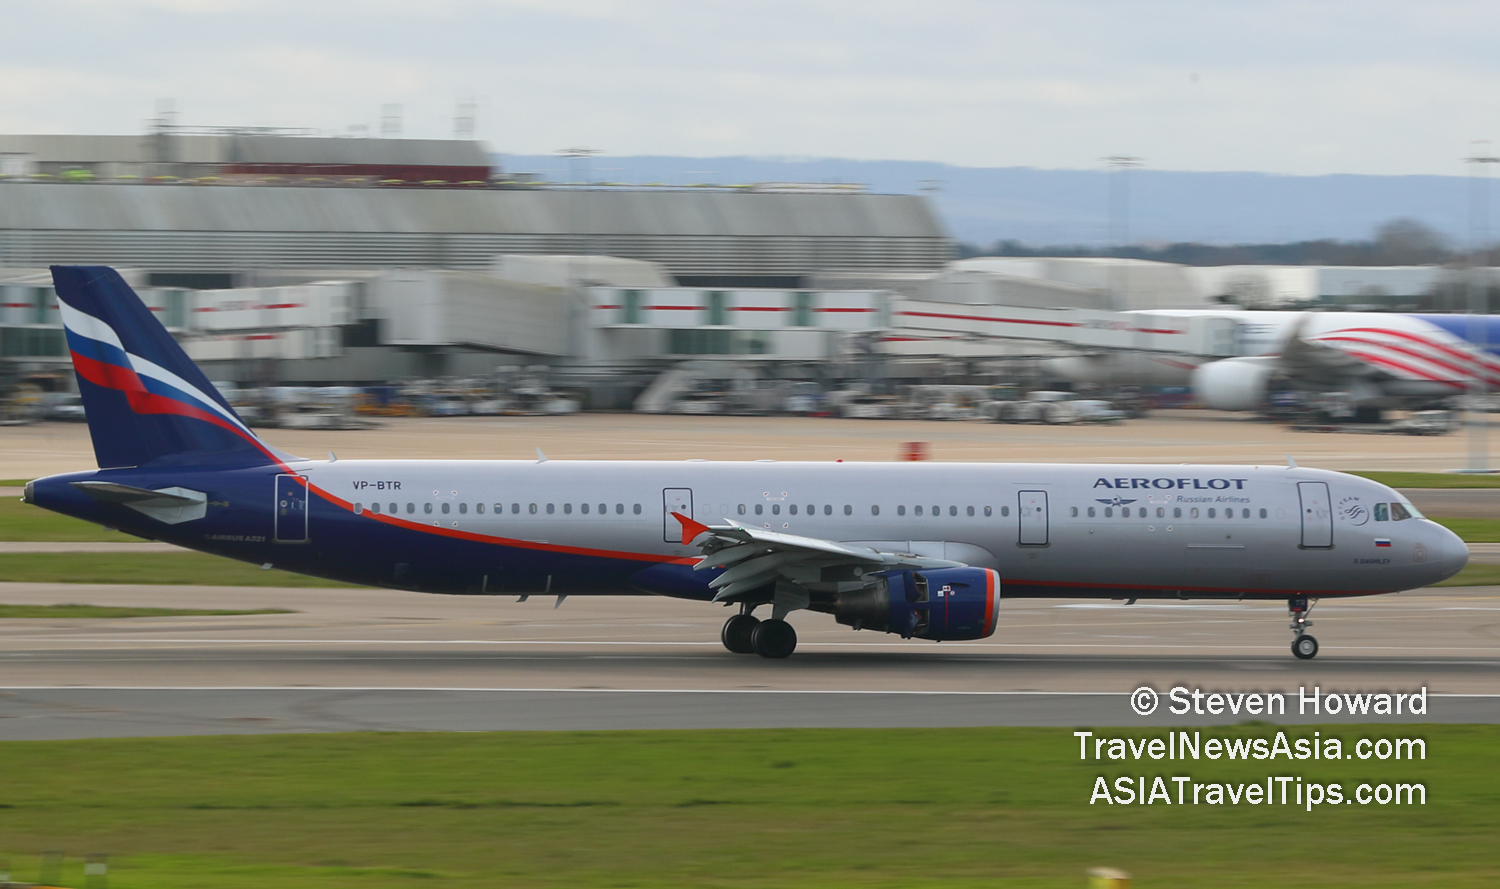 Aeroflot Airbus A321 reg: VP-BTR. Picture by Steven Howard of TravelNewsAsia.com Click to enlarge.